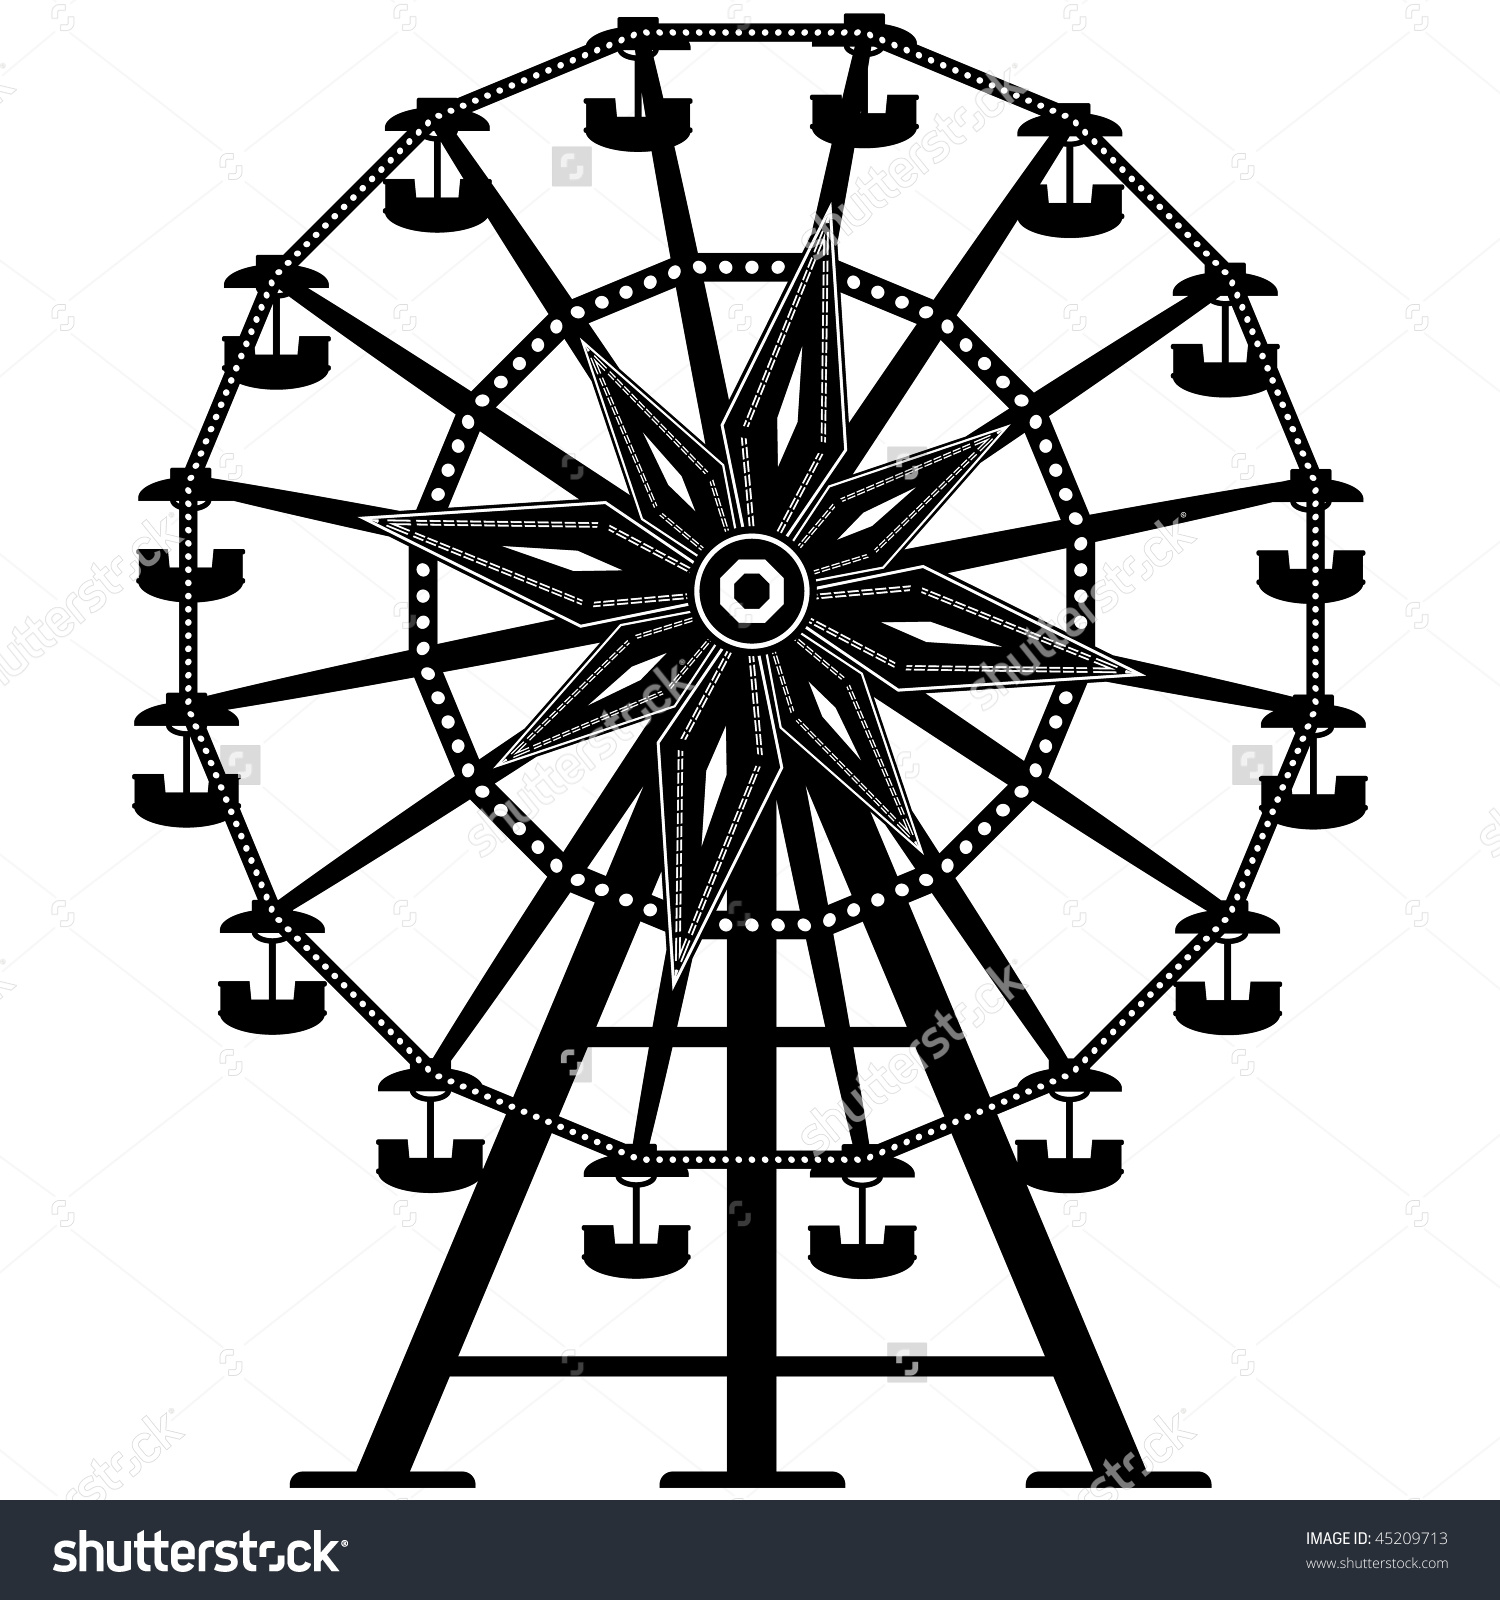 Ferris wheel clipart with people falling 